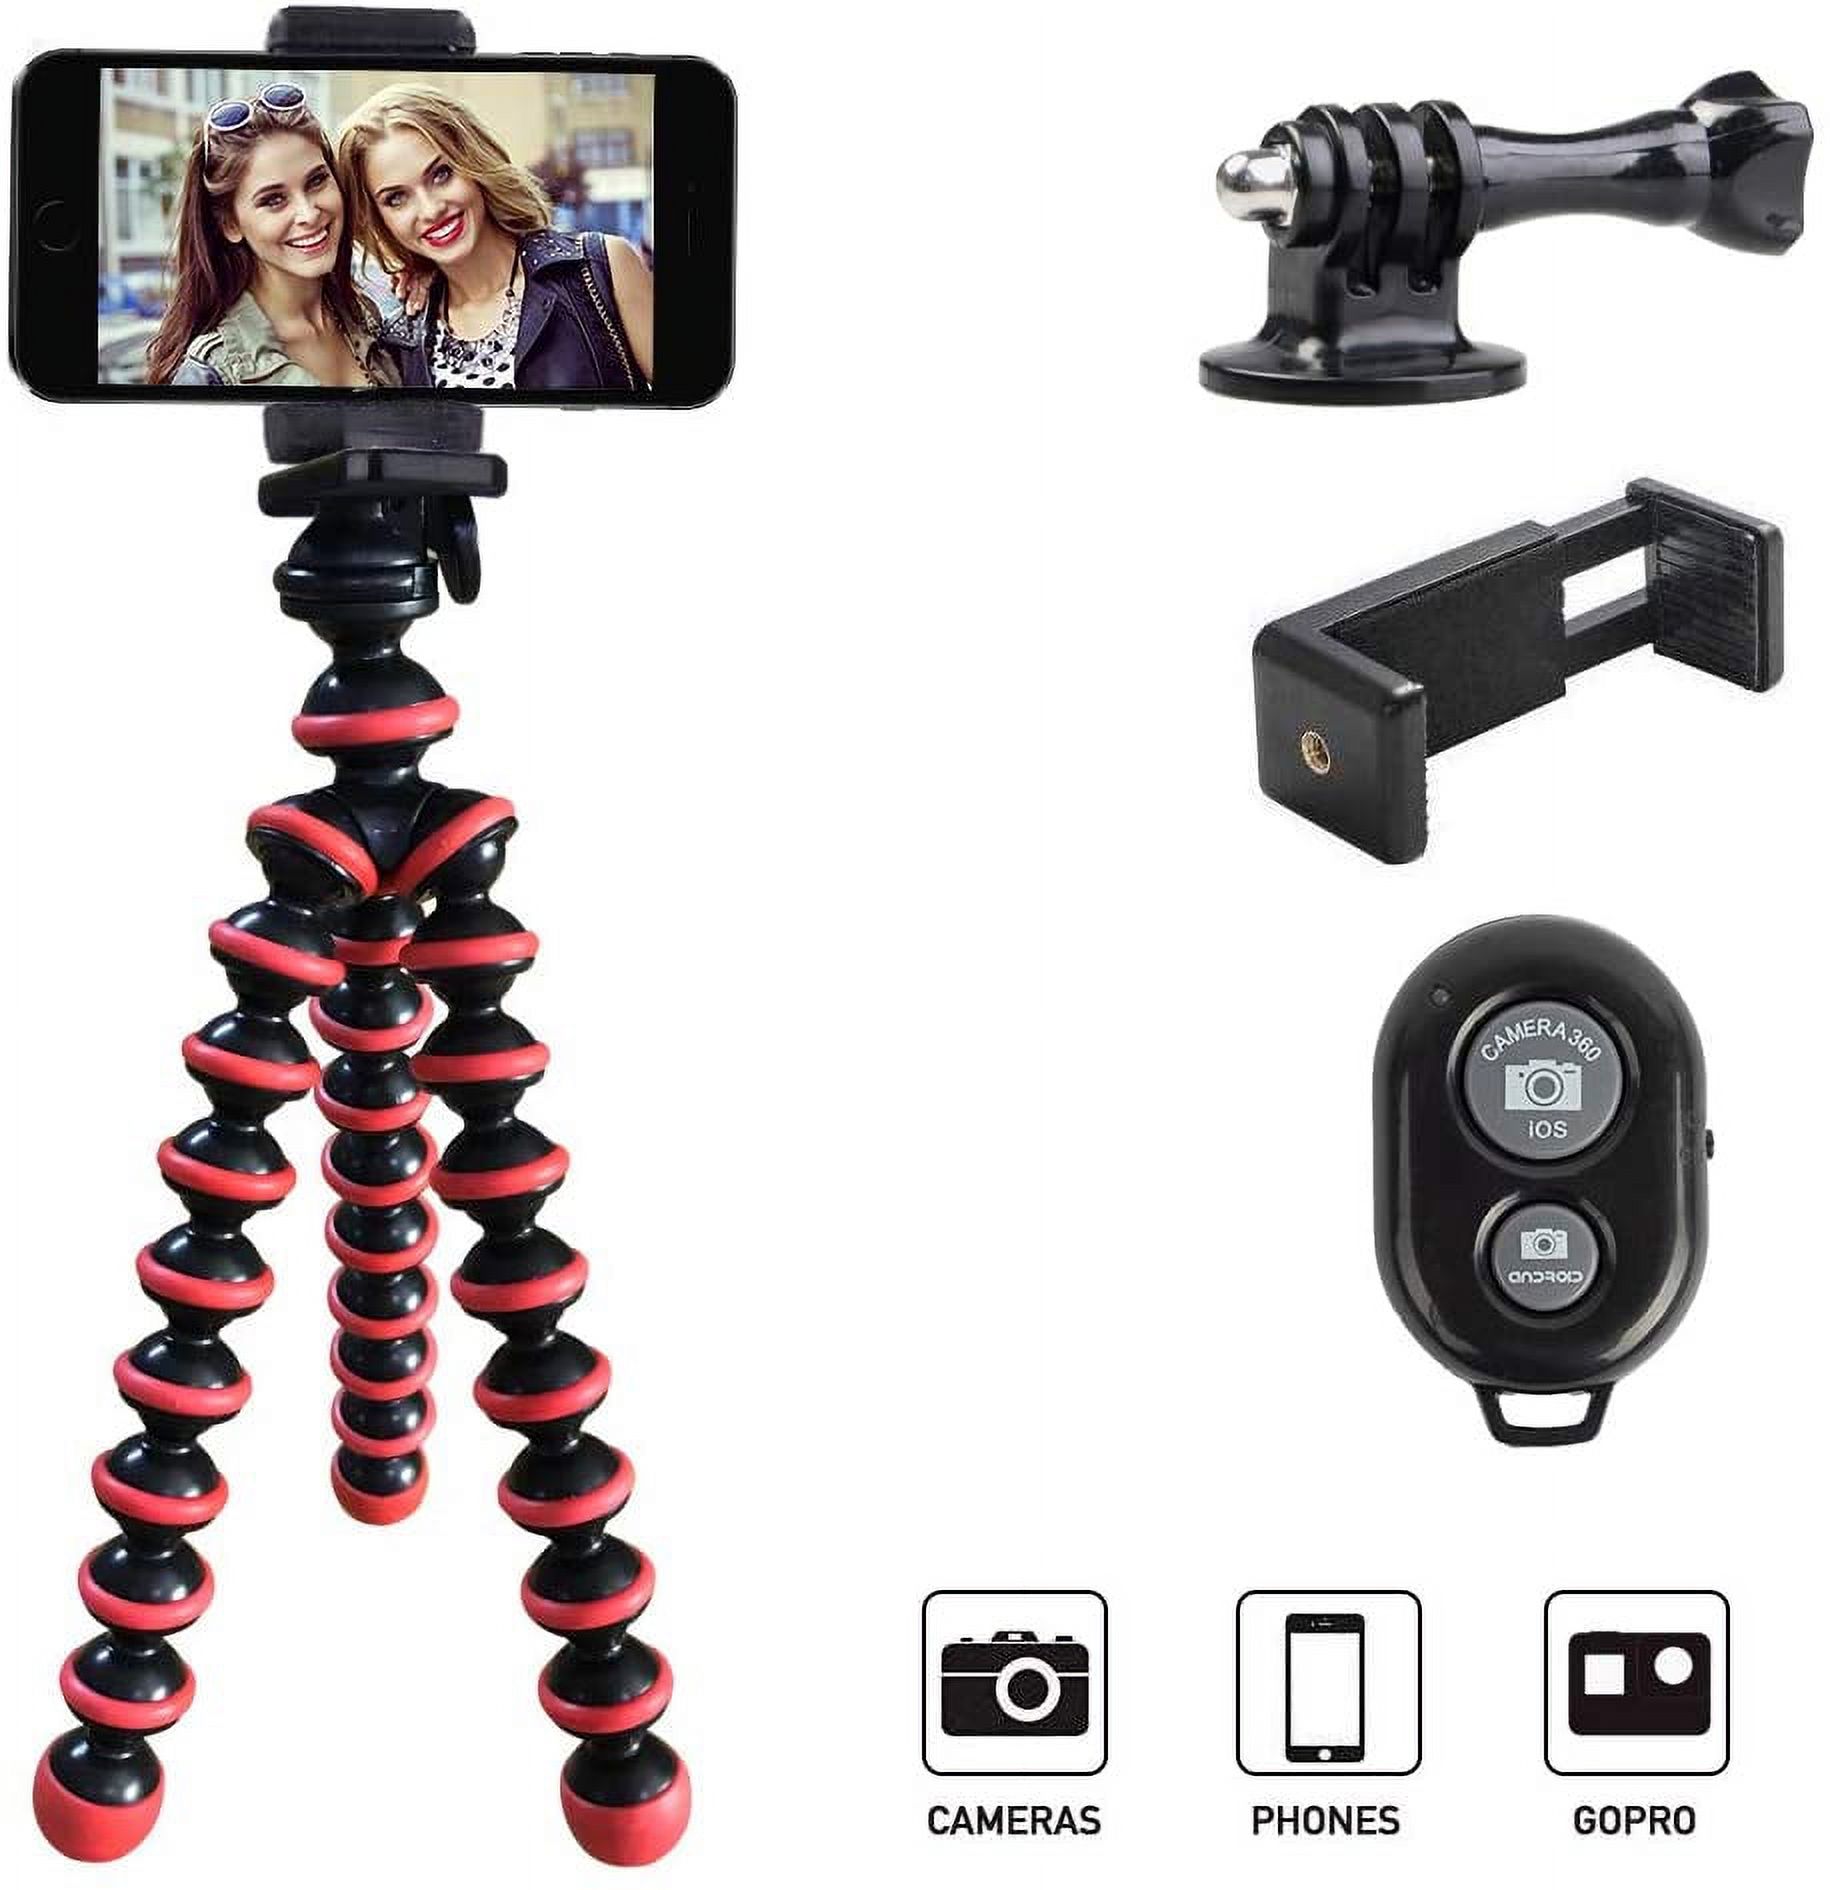 Phone Tripod, Portable Cell Phone Tripod Camera Tripod Stand with Wireless Remote Flexible Tripod Stand Compatible for iPhone 11 Pro Xs MAX XR X SE 8 7 6S Plus Samsung Android Phones Gopro Camera - image 1 of 7